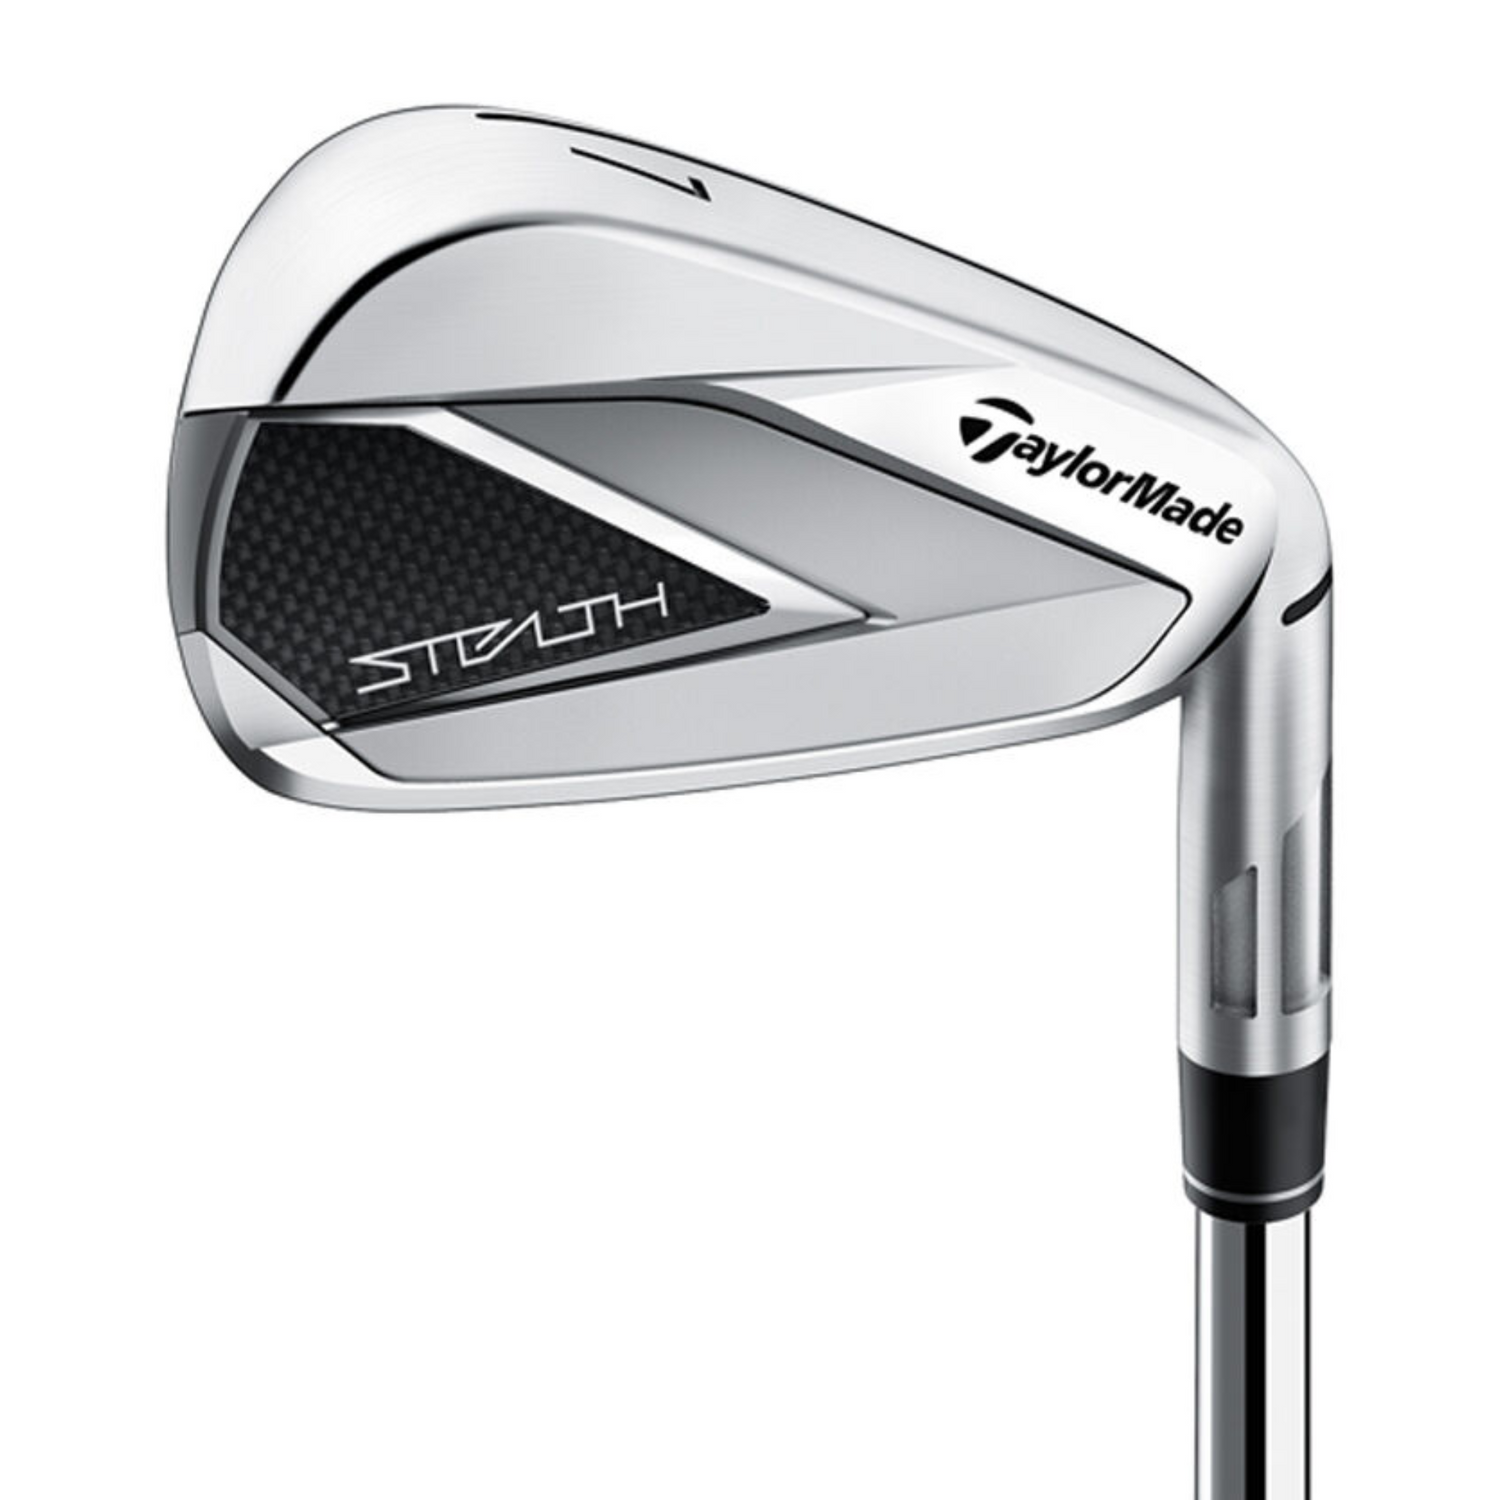 TaylorMade Golf Stealth Graphite Irons   